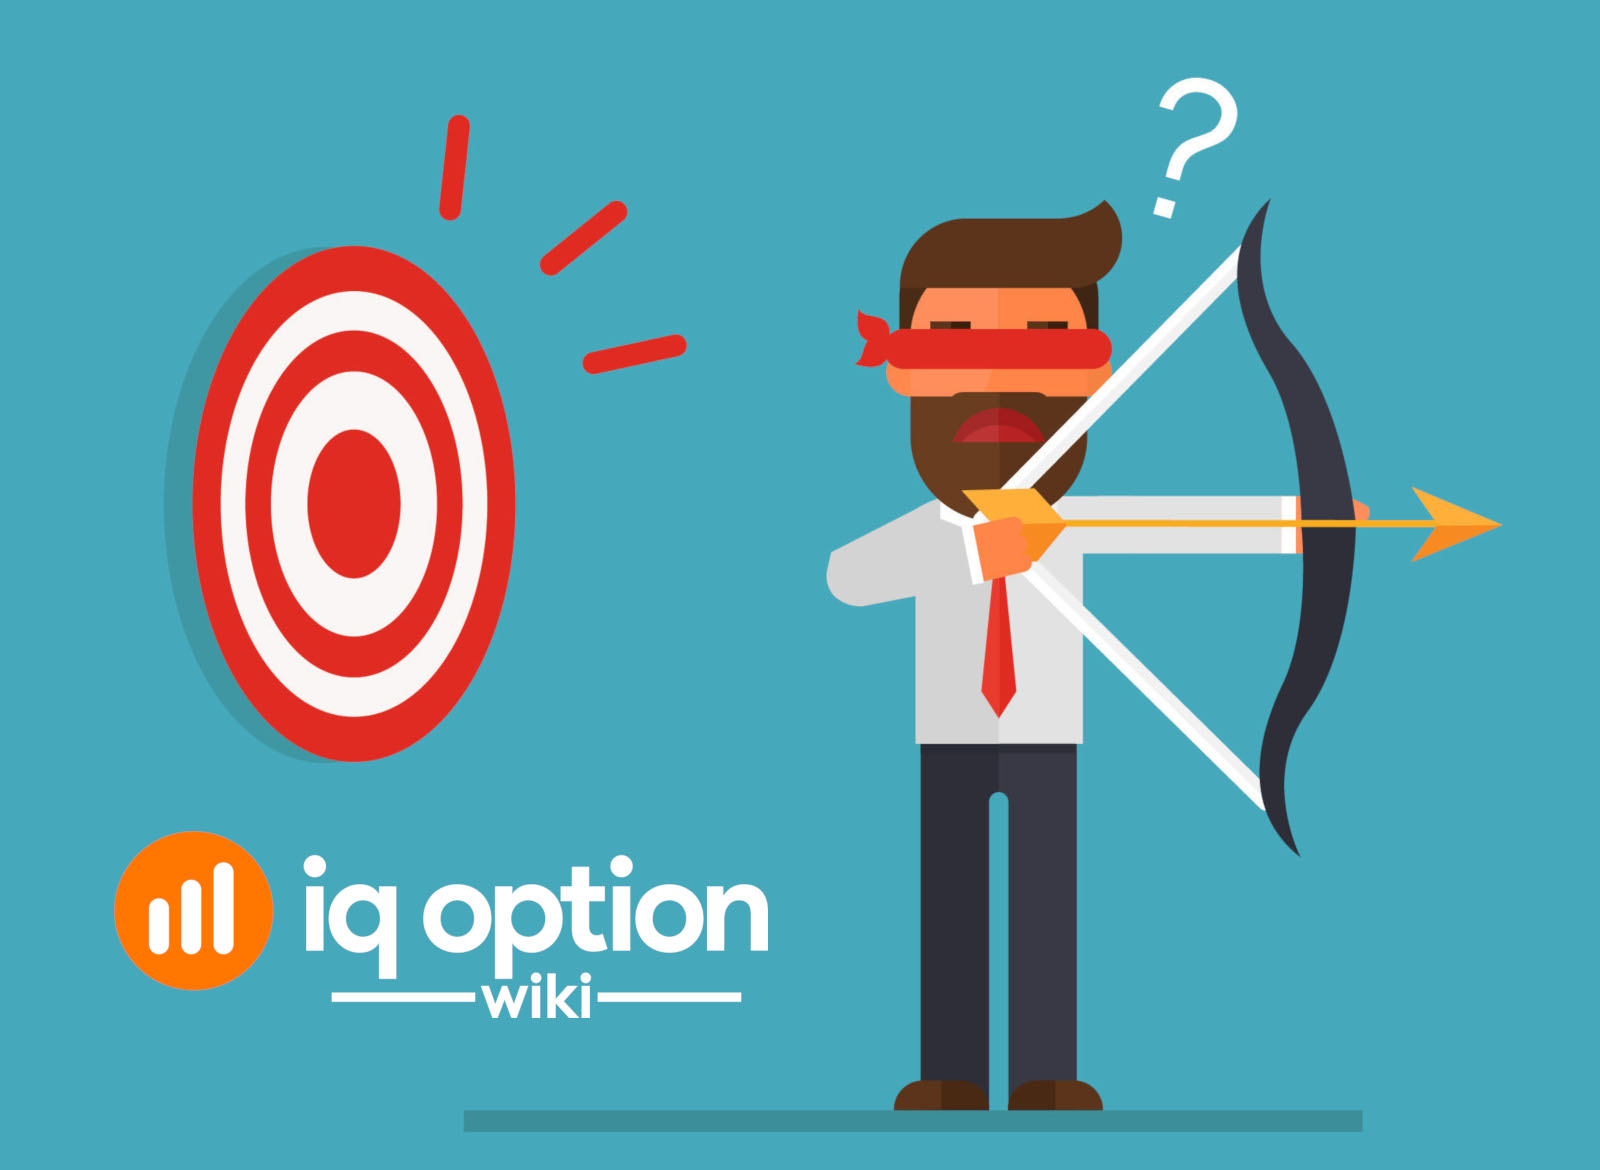 With binary options on IQ Option you can profit regardless of market direction